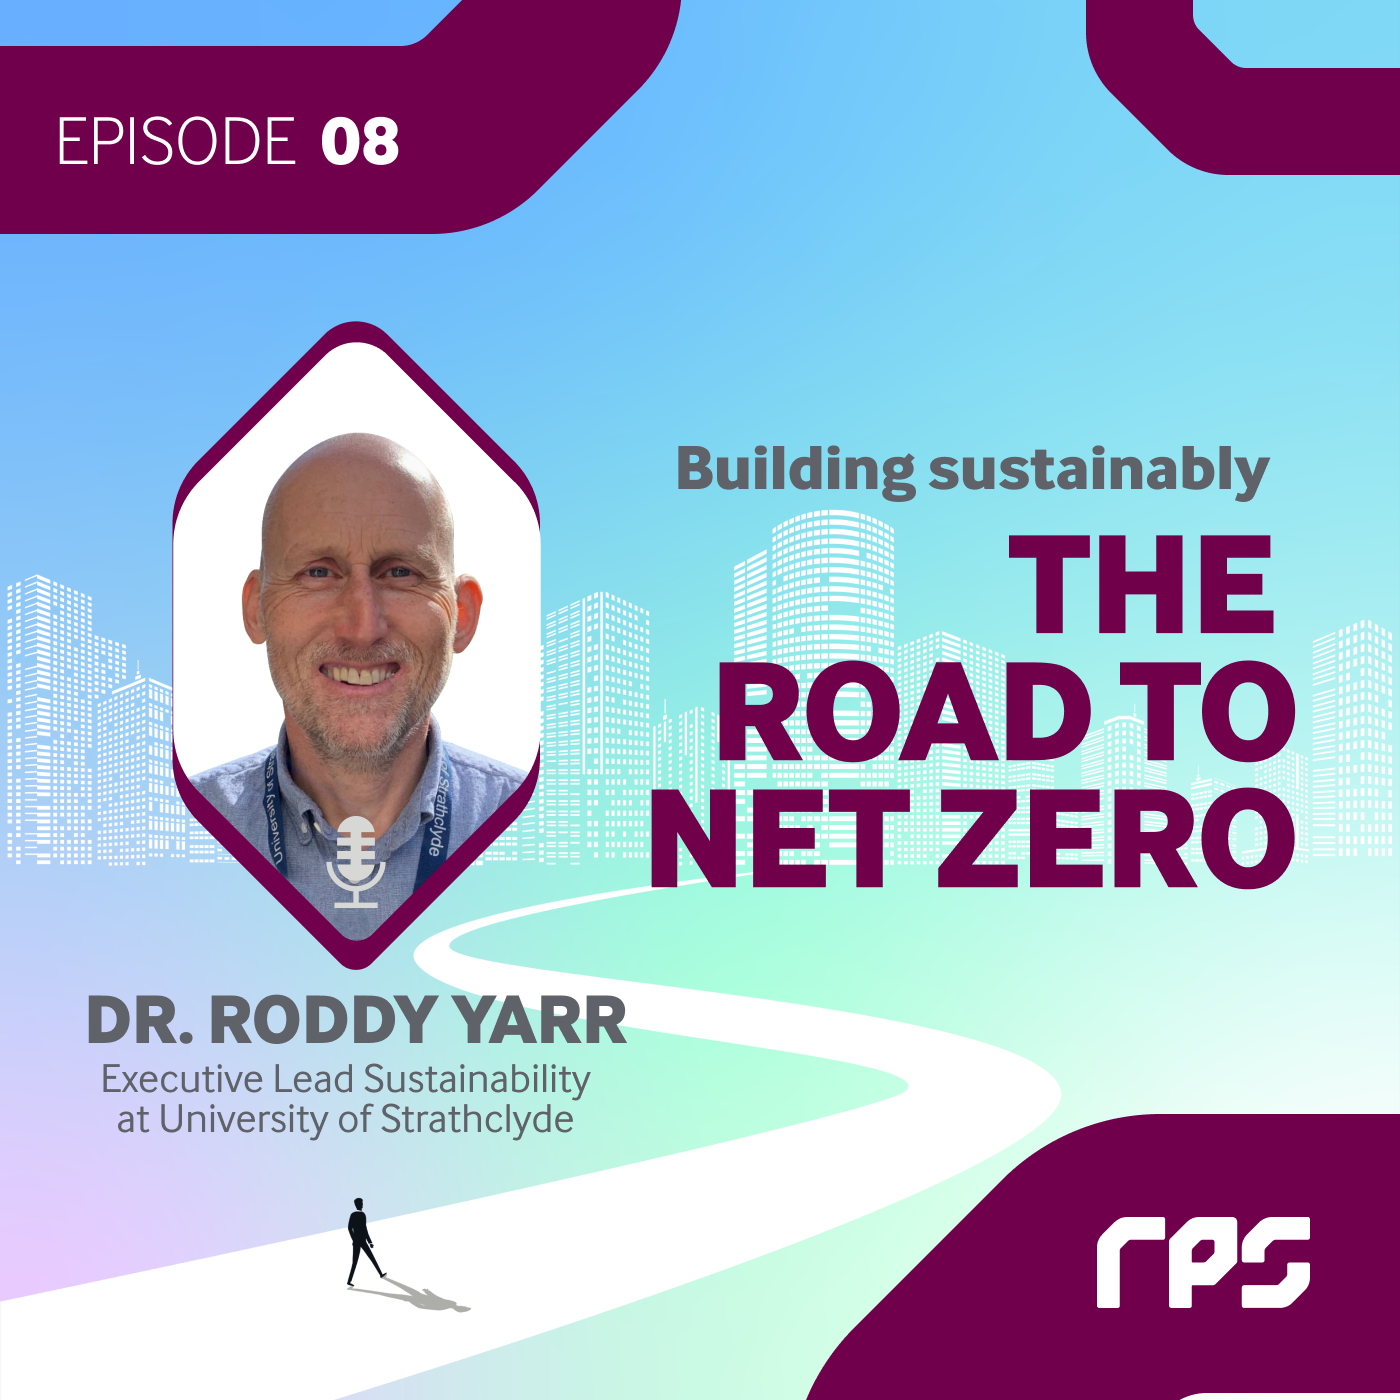 Climate-Neutral Strategies for Universities and City Districts with Dr. Roddy Yarr, Executive Lead of Sustainability at the University of Strathclyde